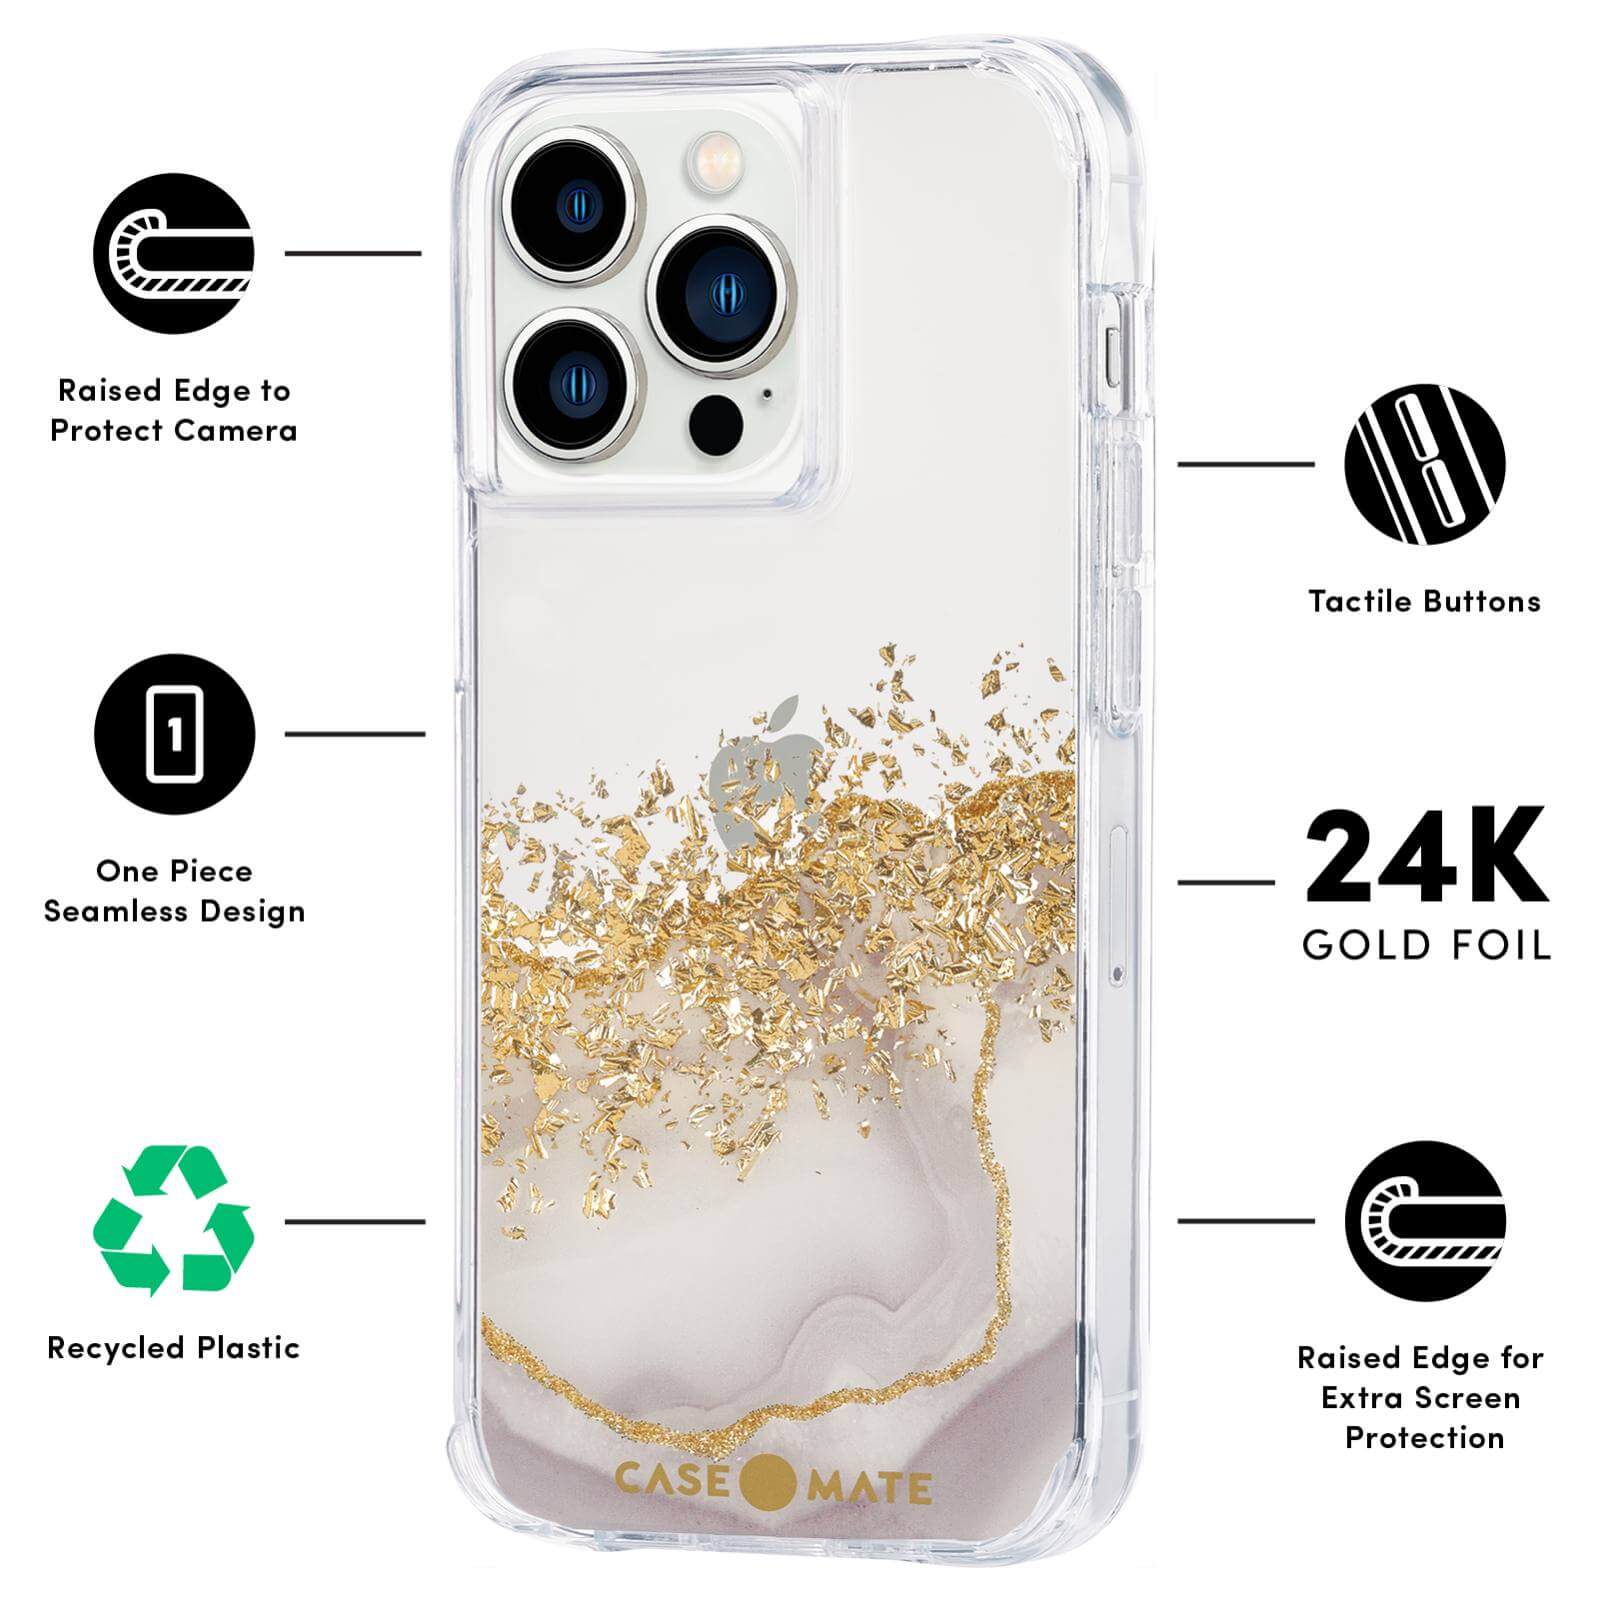 FEATURES RAISED EDGE TO PROTECT CAMERA, ONE PIECE SEAMLESS DESIGN, RECYCLED PLASTIC, TACTILE BUTTONS, 24K GOLD FOIL, RAISED EDGE FOR EXTRA SCREEN PROTECTION. COLOR::KARAT MARBLE